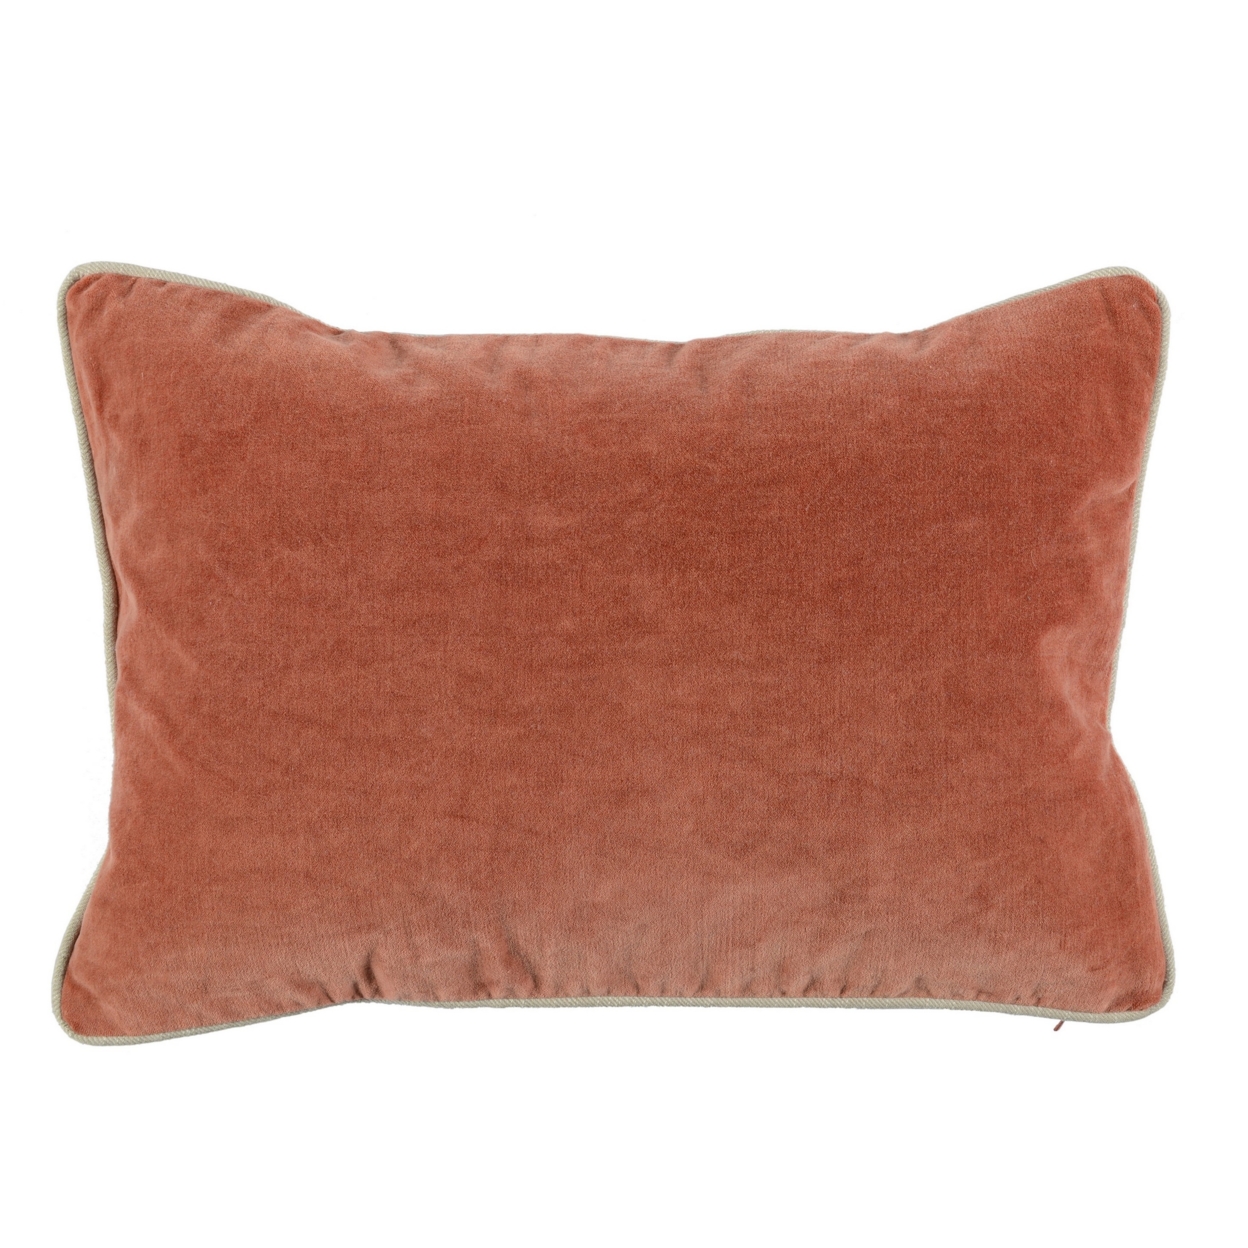 Rectangular Fabric Throw Pillow With Solid Color And Piped Edges, Pink- Saltoro Sherpi